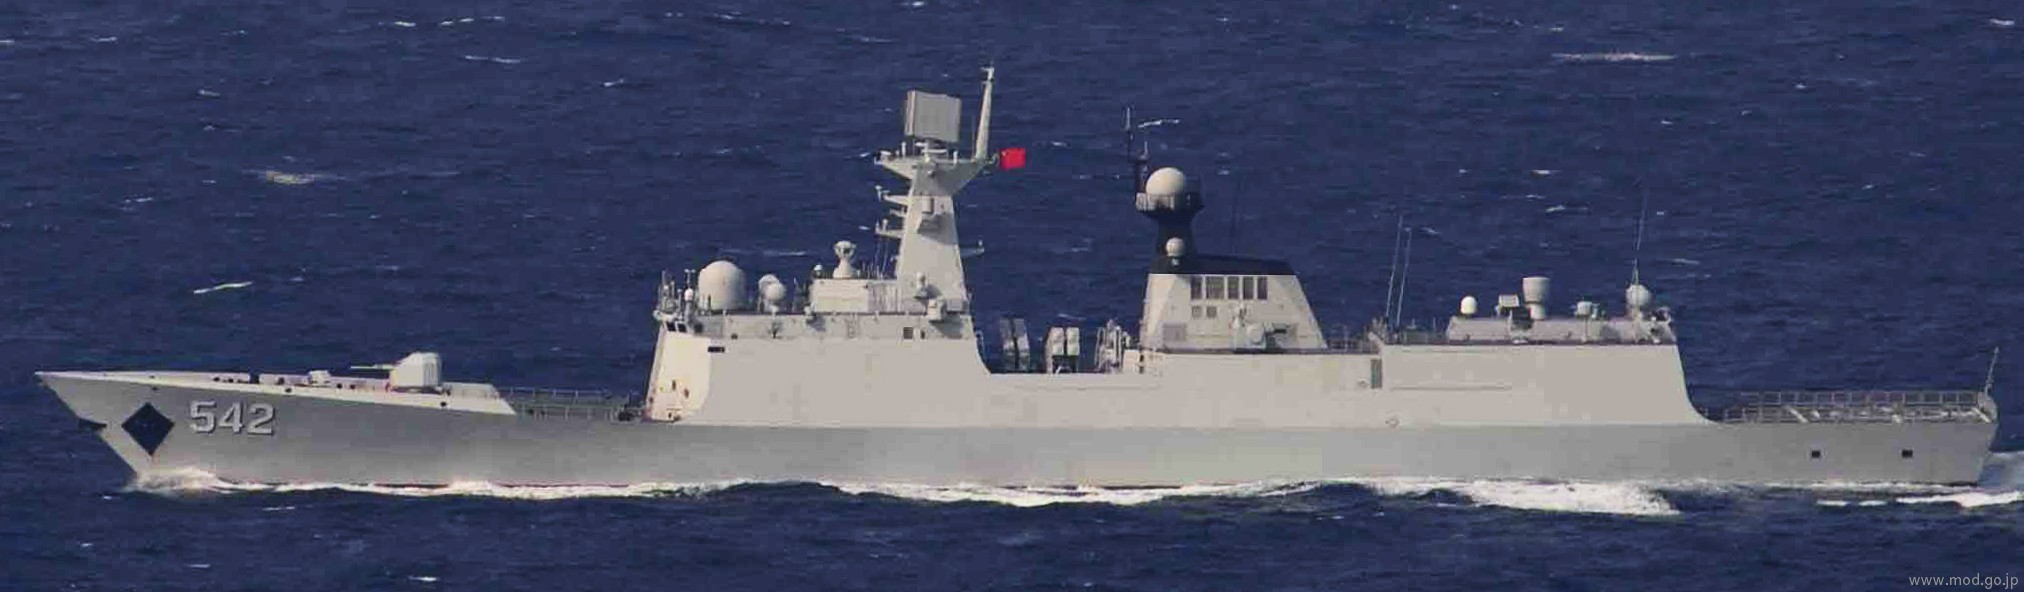 ffg-542 plans zaozhuang type 054a jiangkai ii class guided missile frigate china people's liberation army navy 02